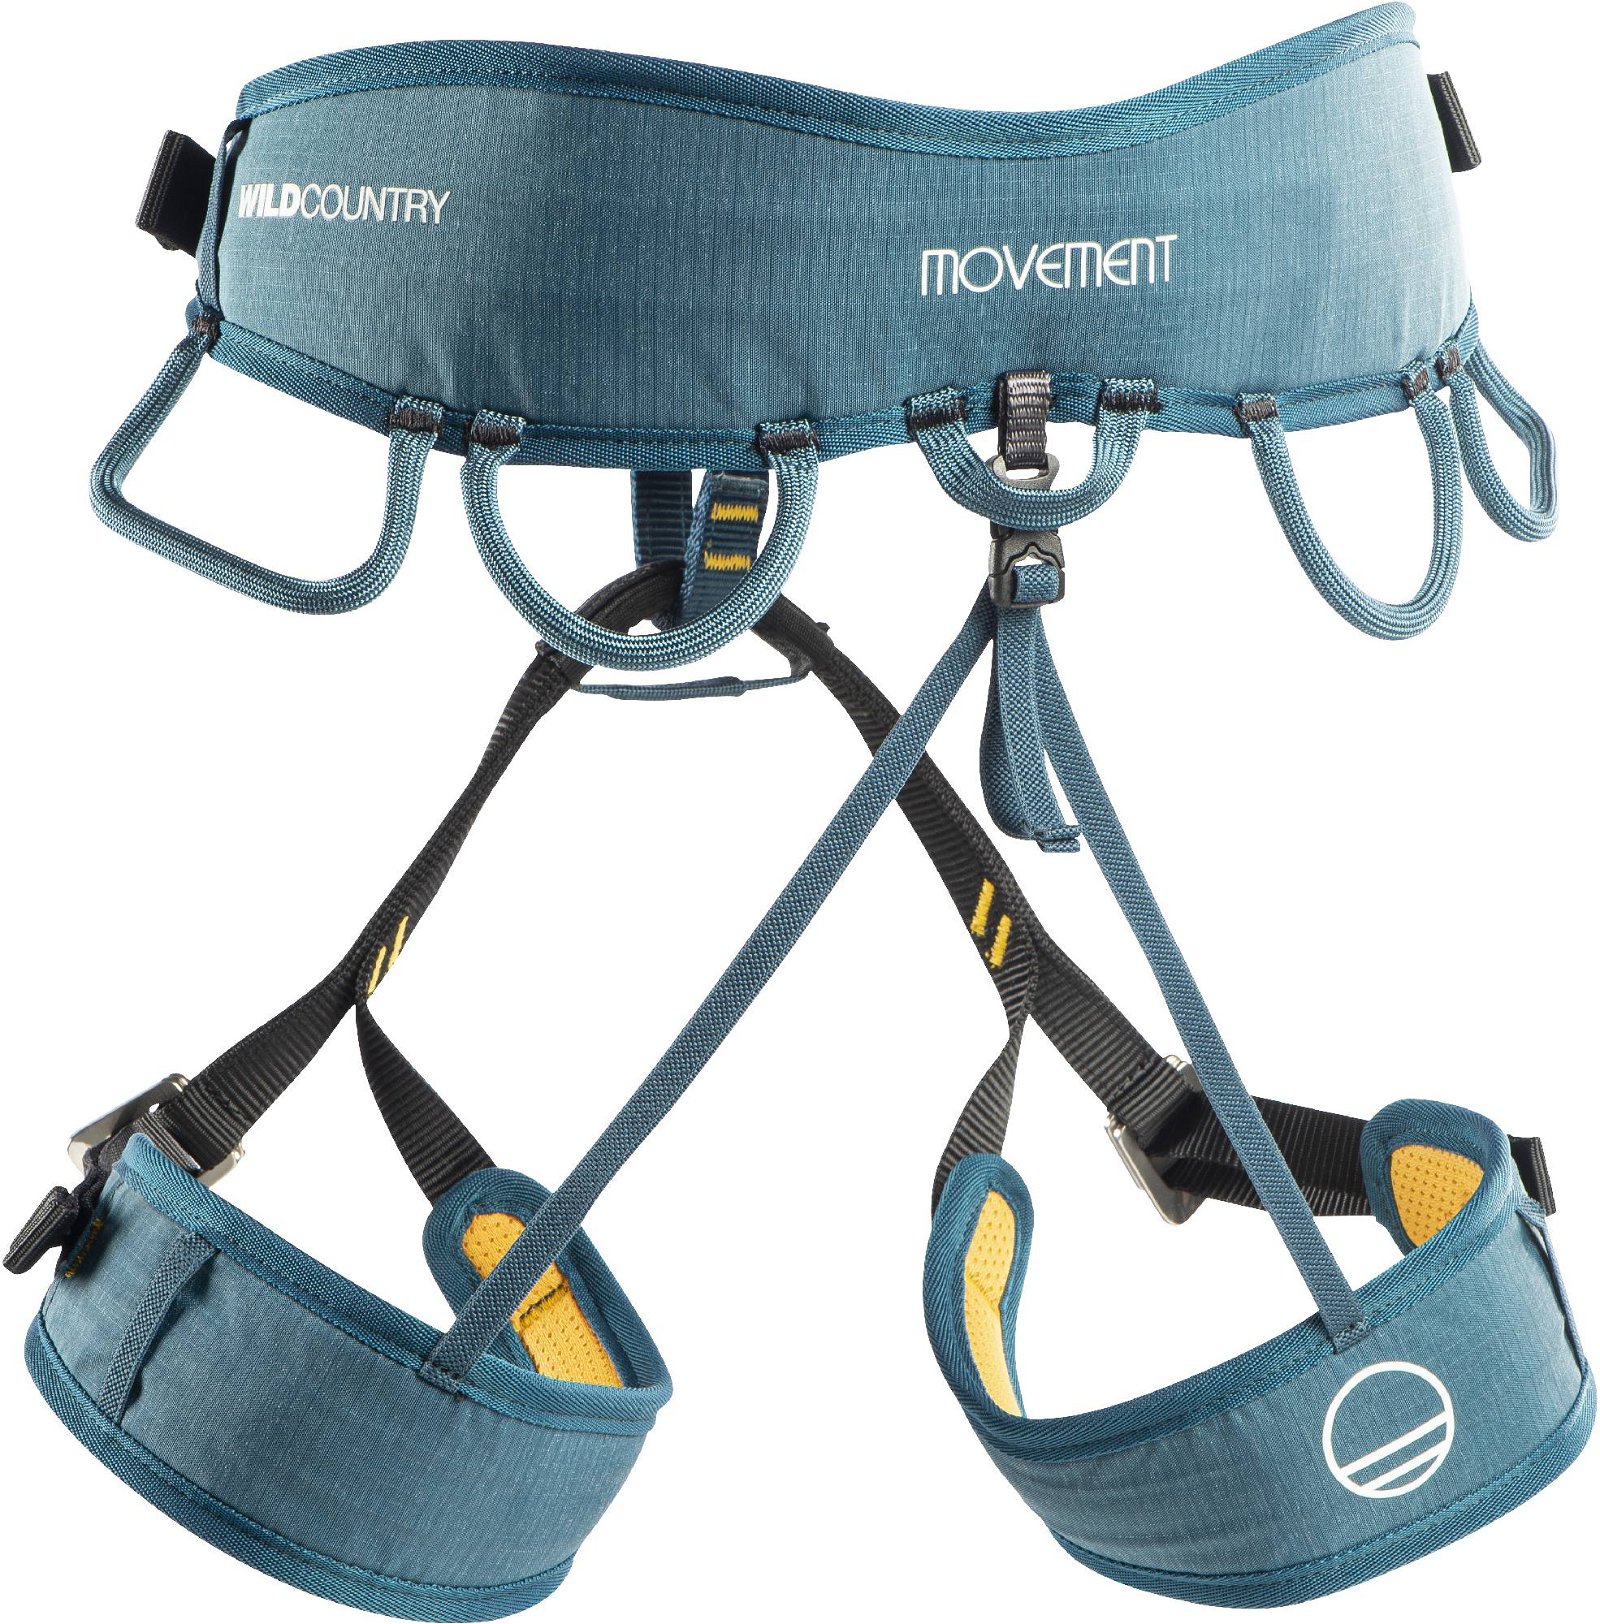 Wild Country Movement harness